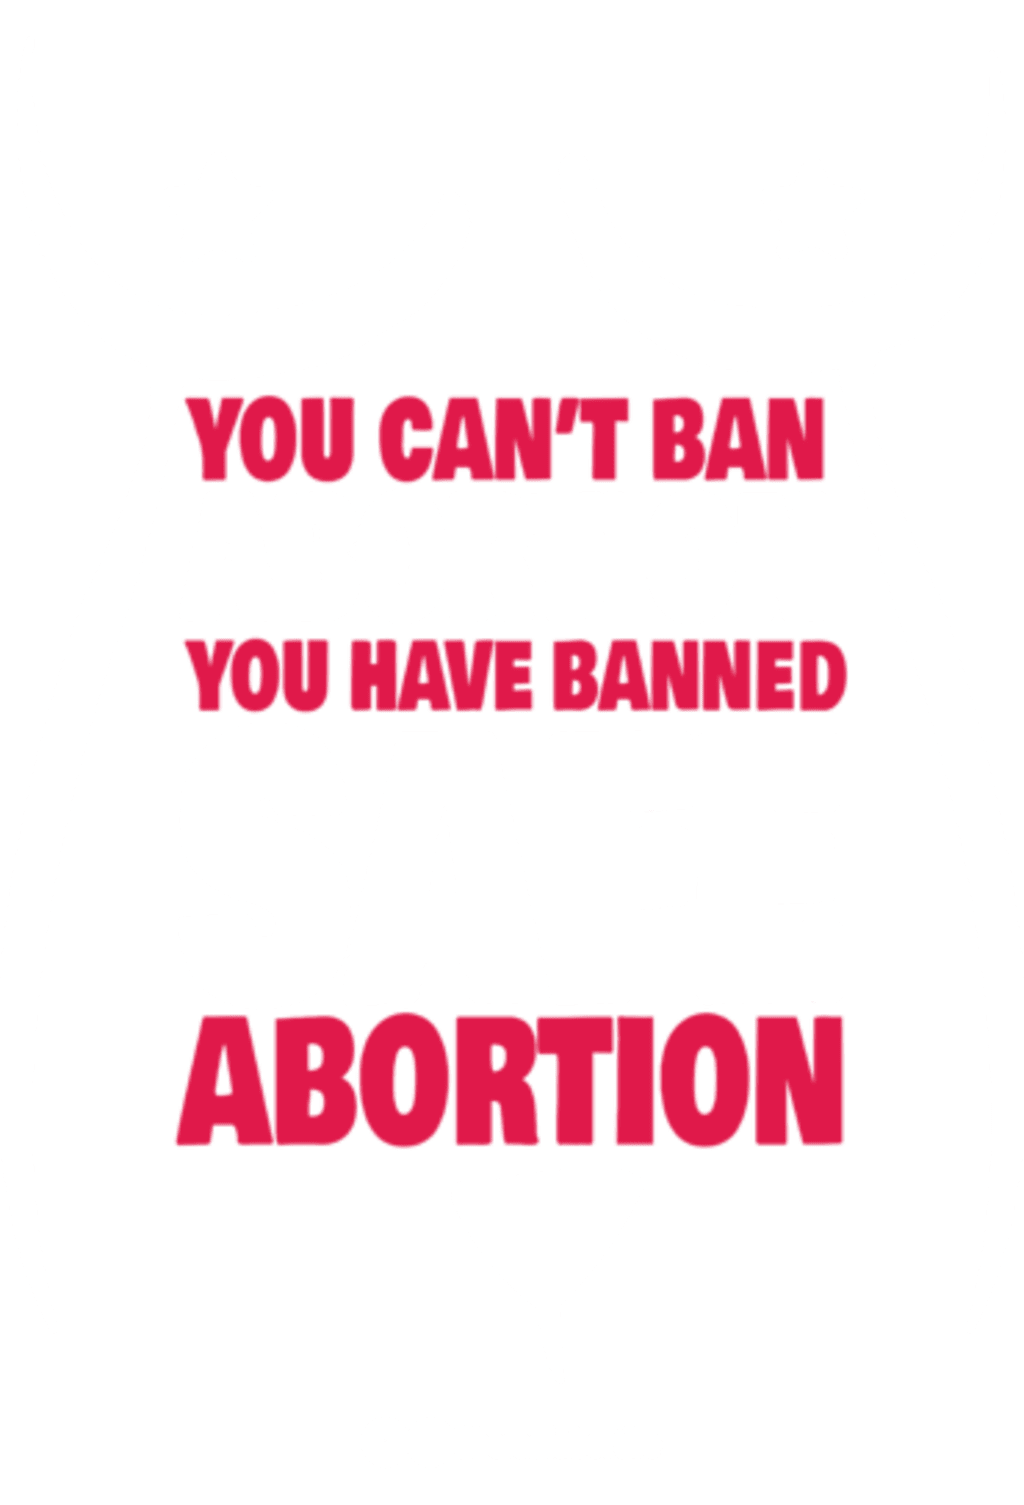 You can't ban abortion: you have banned safe abortion